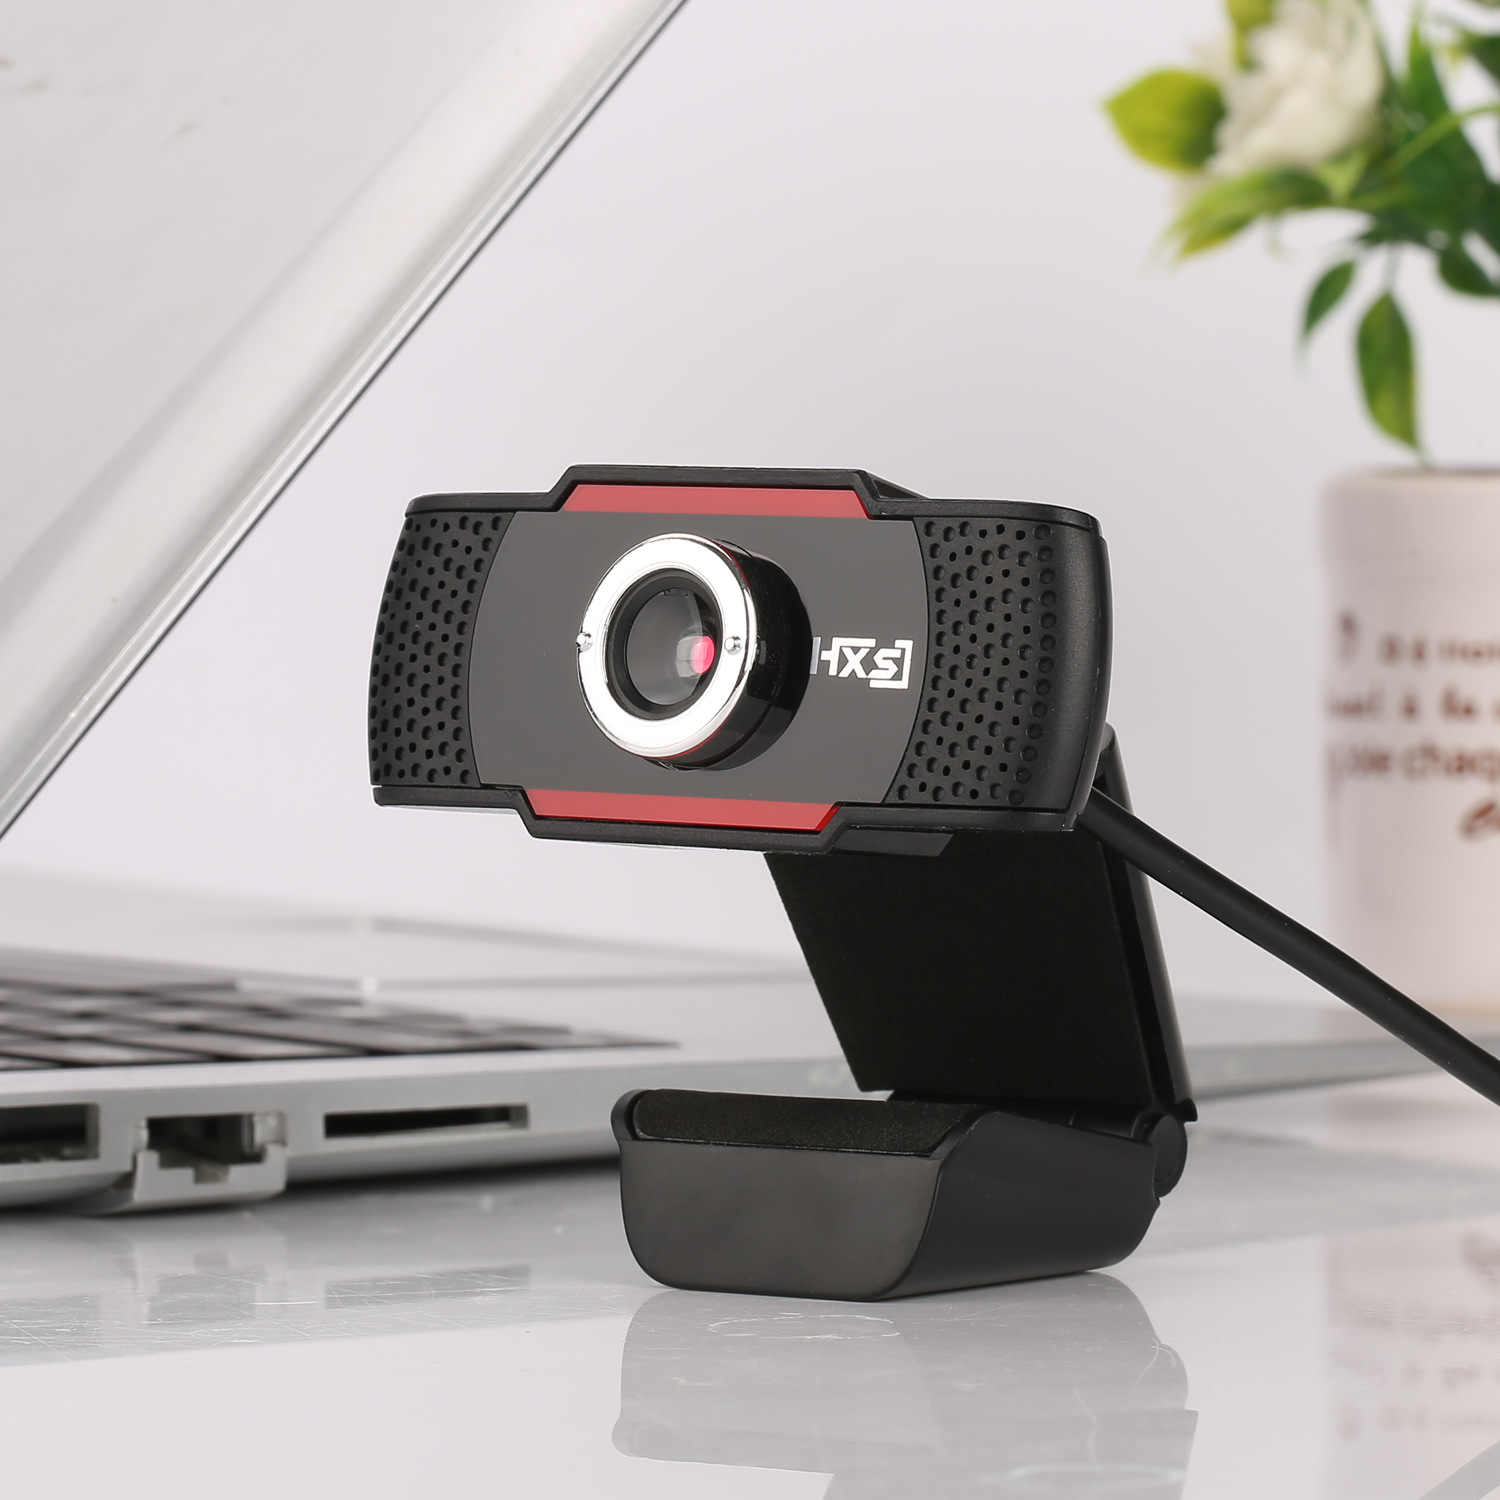 A870 USB Webcam,Web Camera,Web cam Desktop camera With Built-in MIC for Video Calling and Recording 7